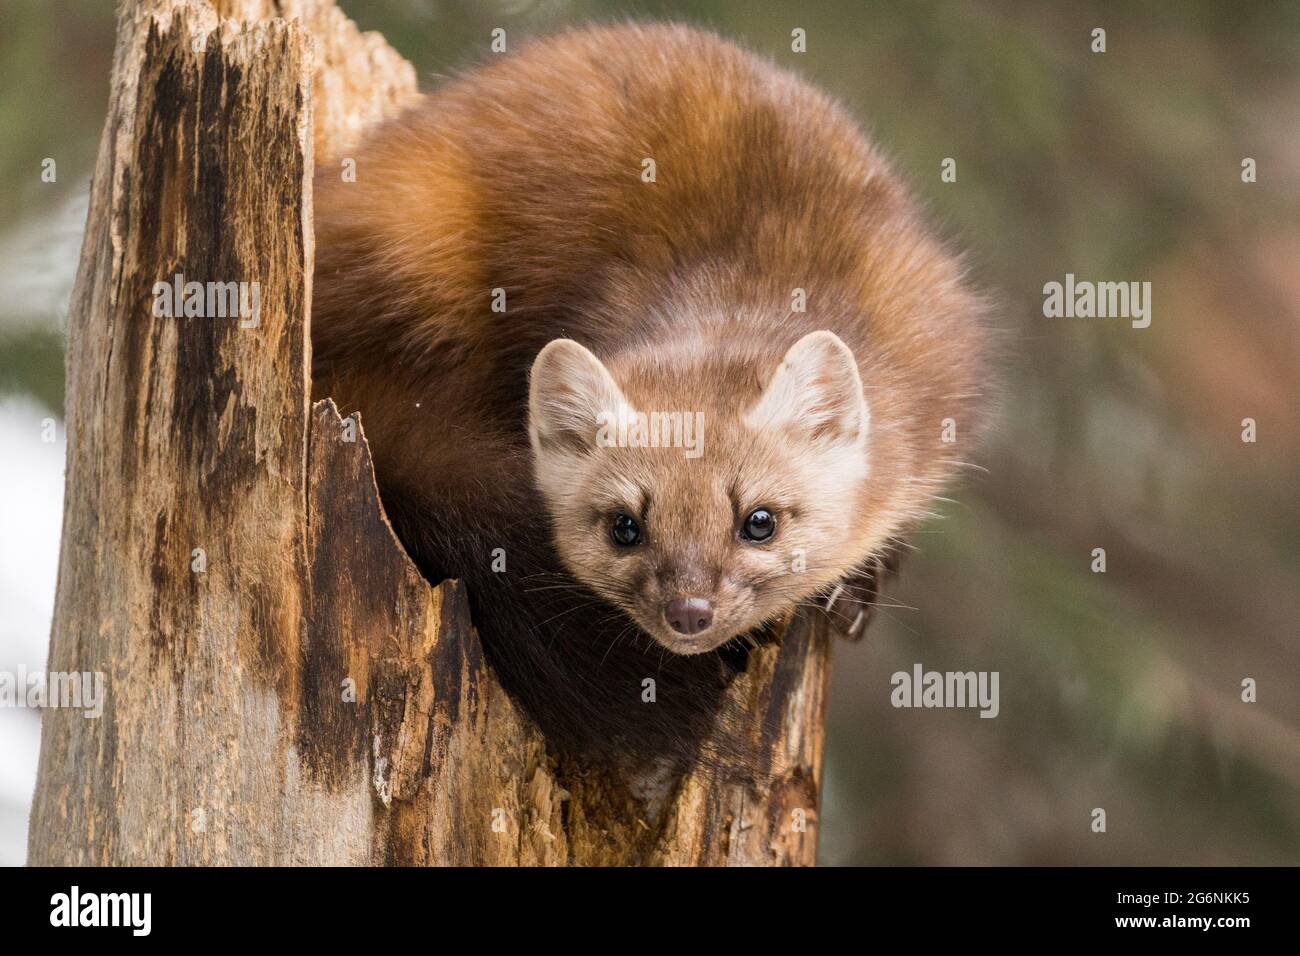 American Marten perched on a tree stump in Yellowstone National Park. Stock Photo